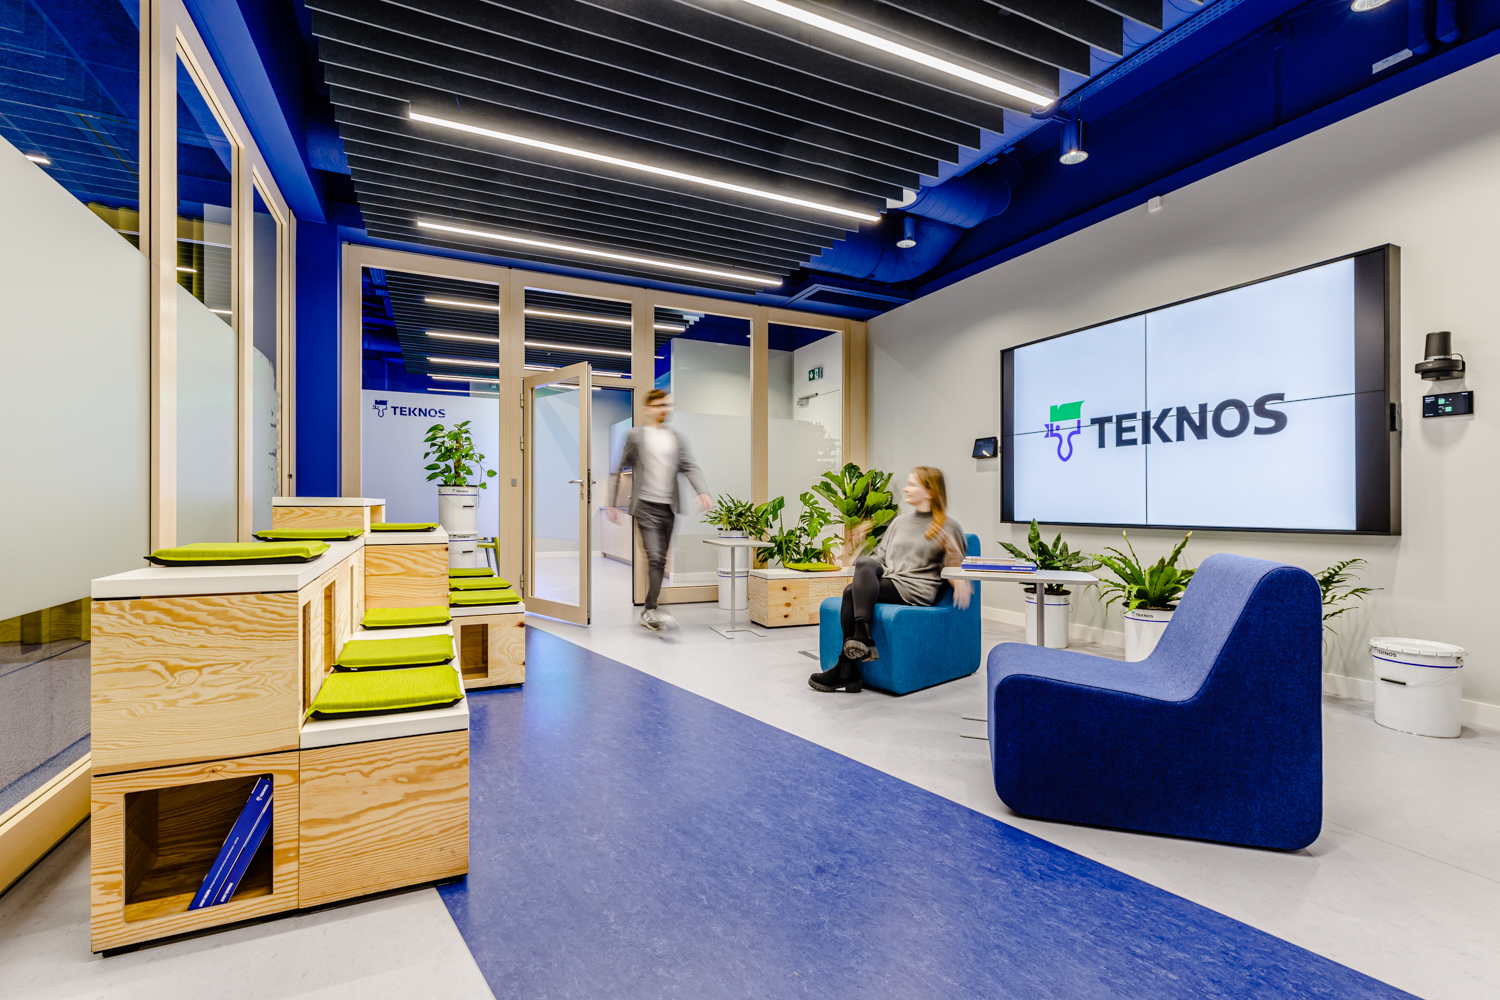 Teknos office – dynamic and harmonious, like nature in Finland